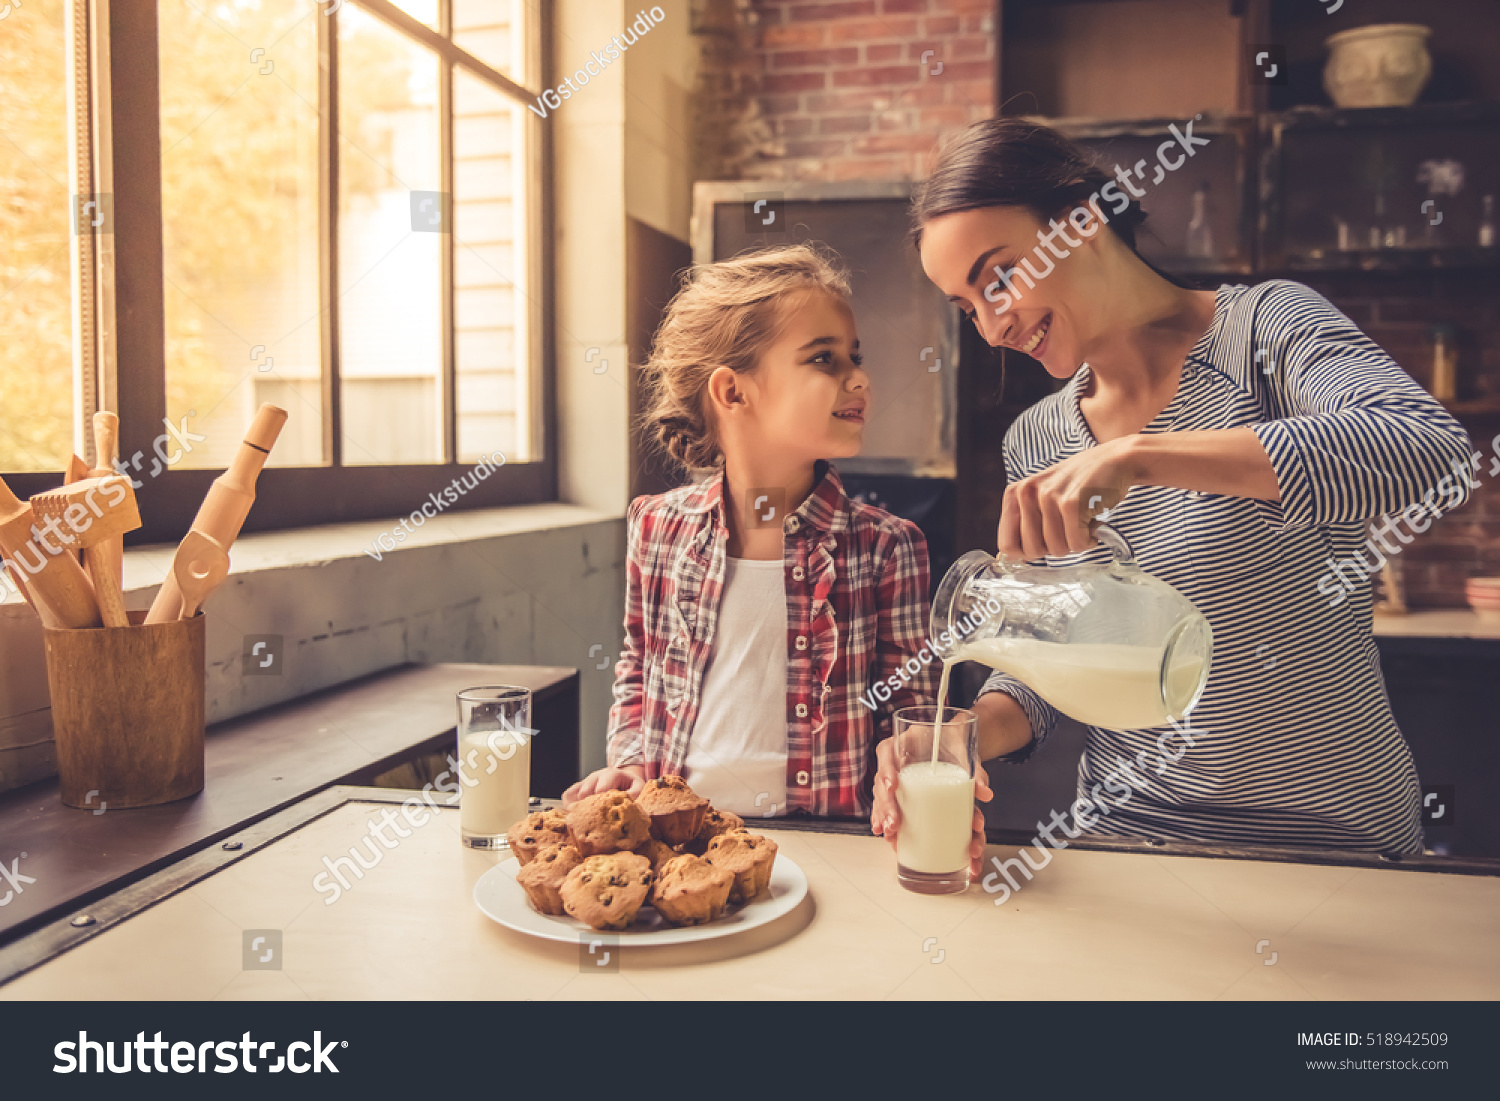 Cute little girl and her beautiful mother are smiling while drinking milk and eating muffins in kitchen. Mother is pouring milk #518942509